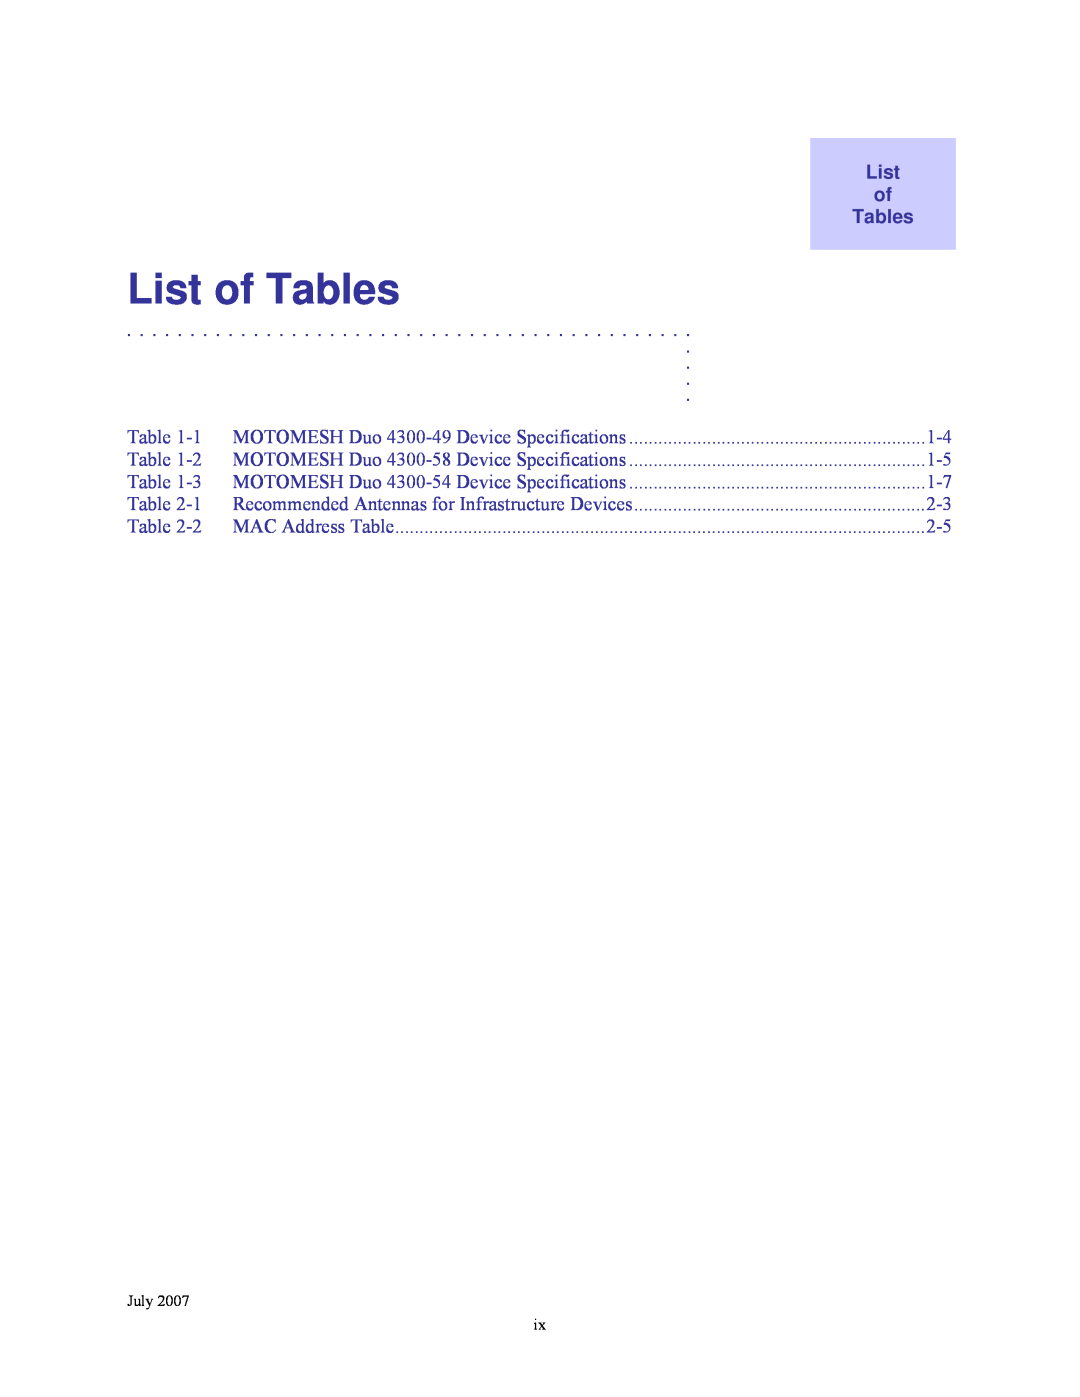 Nikon manual List of Tables, 1 MOTOMESH Duo 4300-49 Device Specifications 